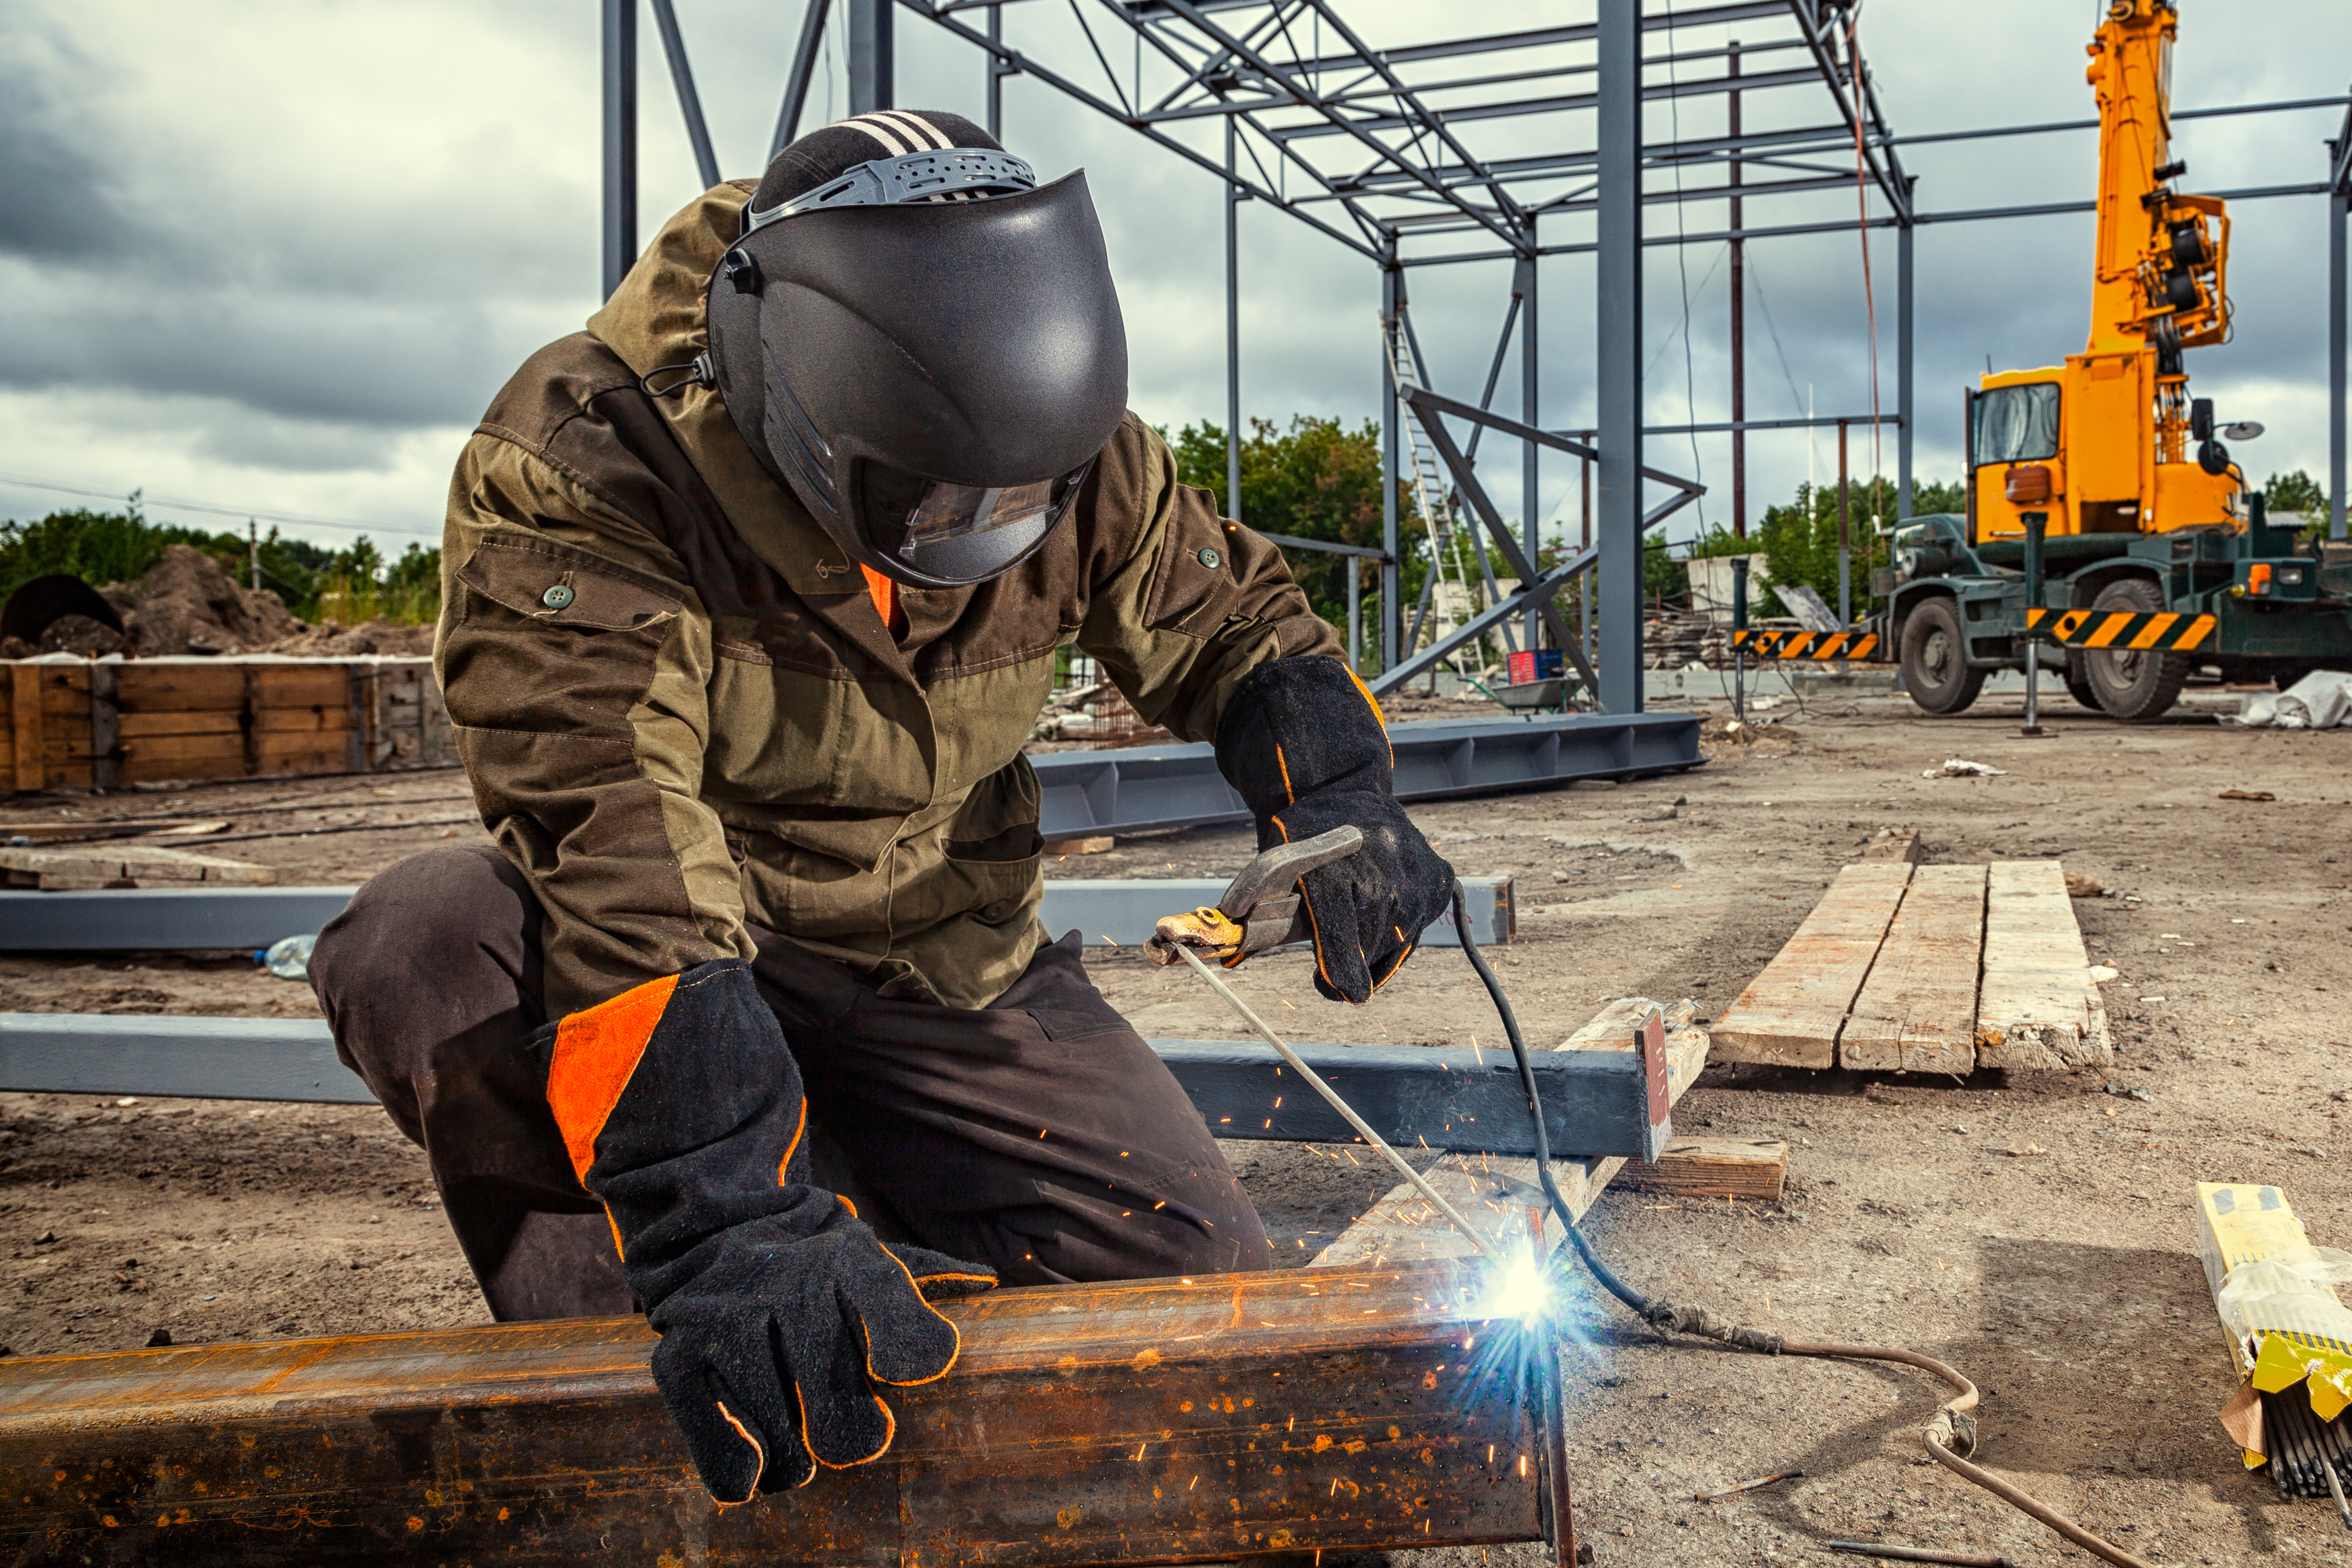 Four uses for steel fabrication